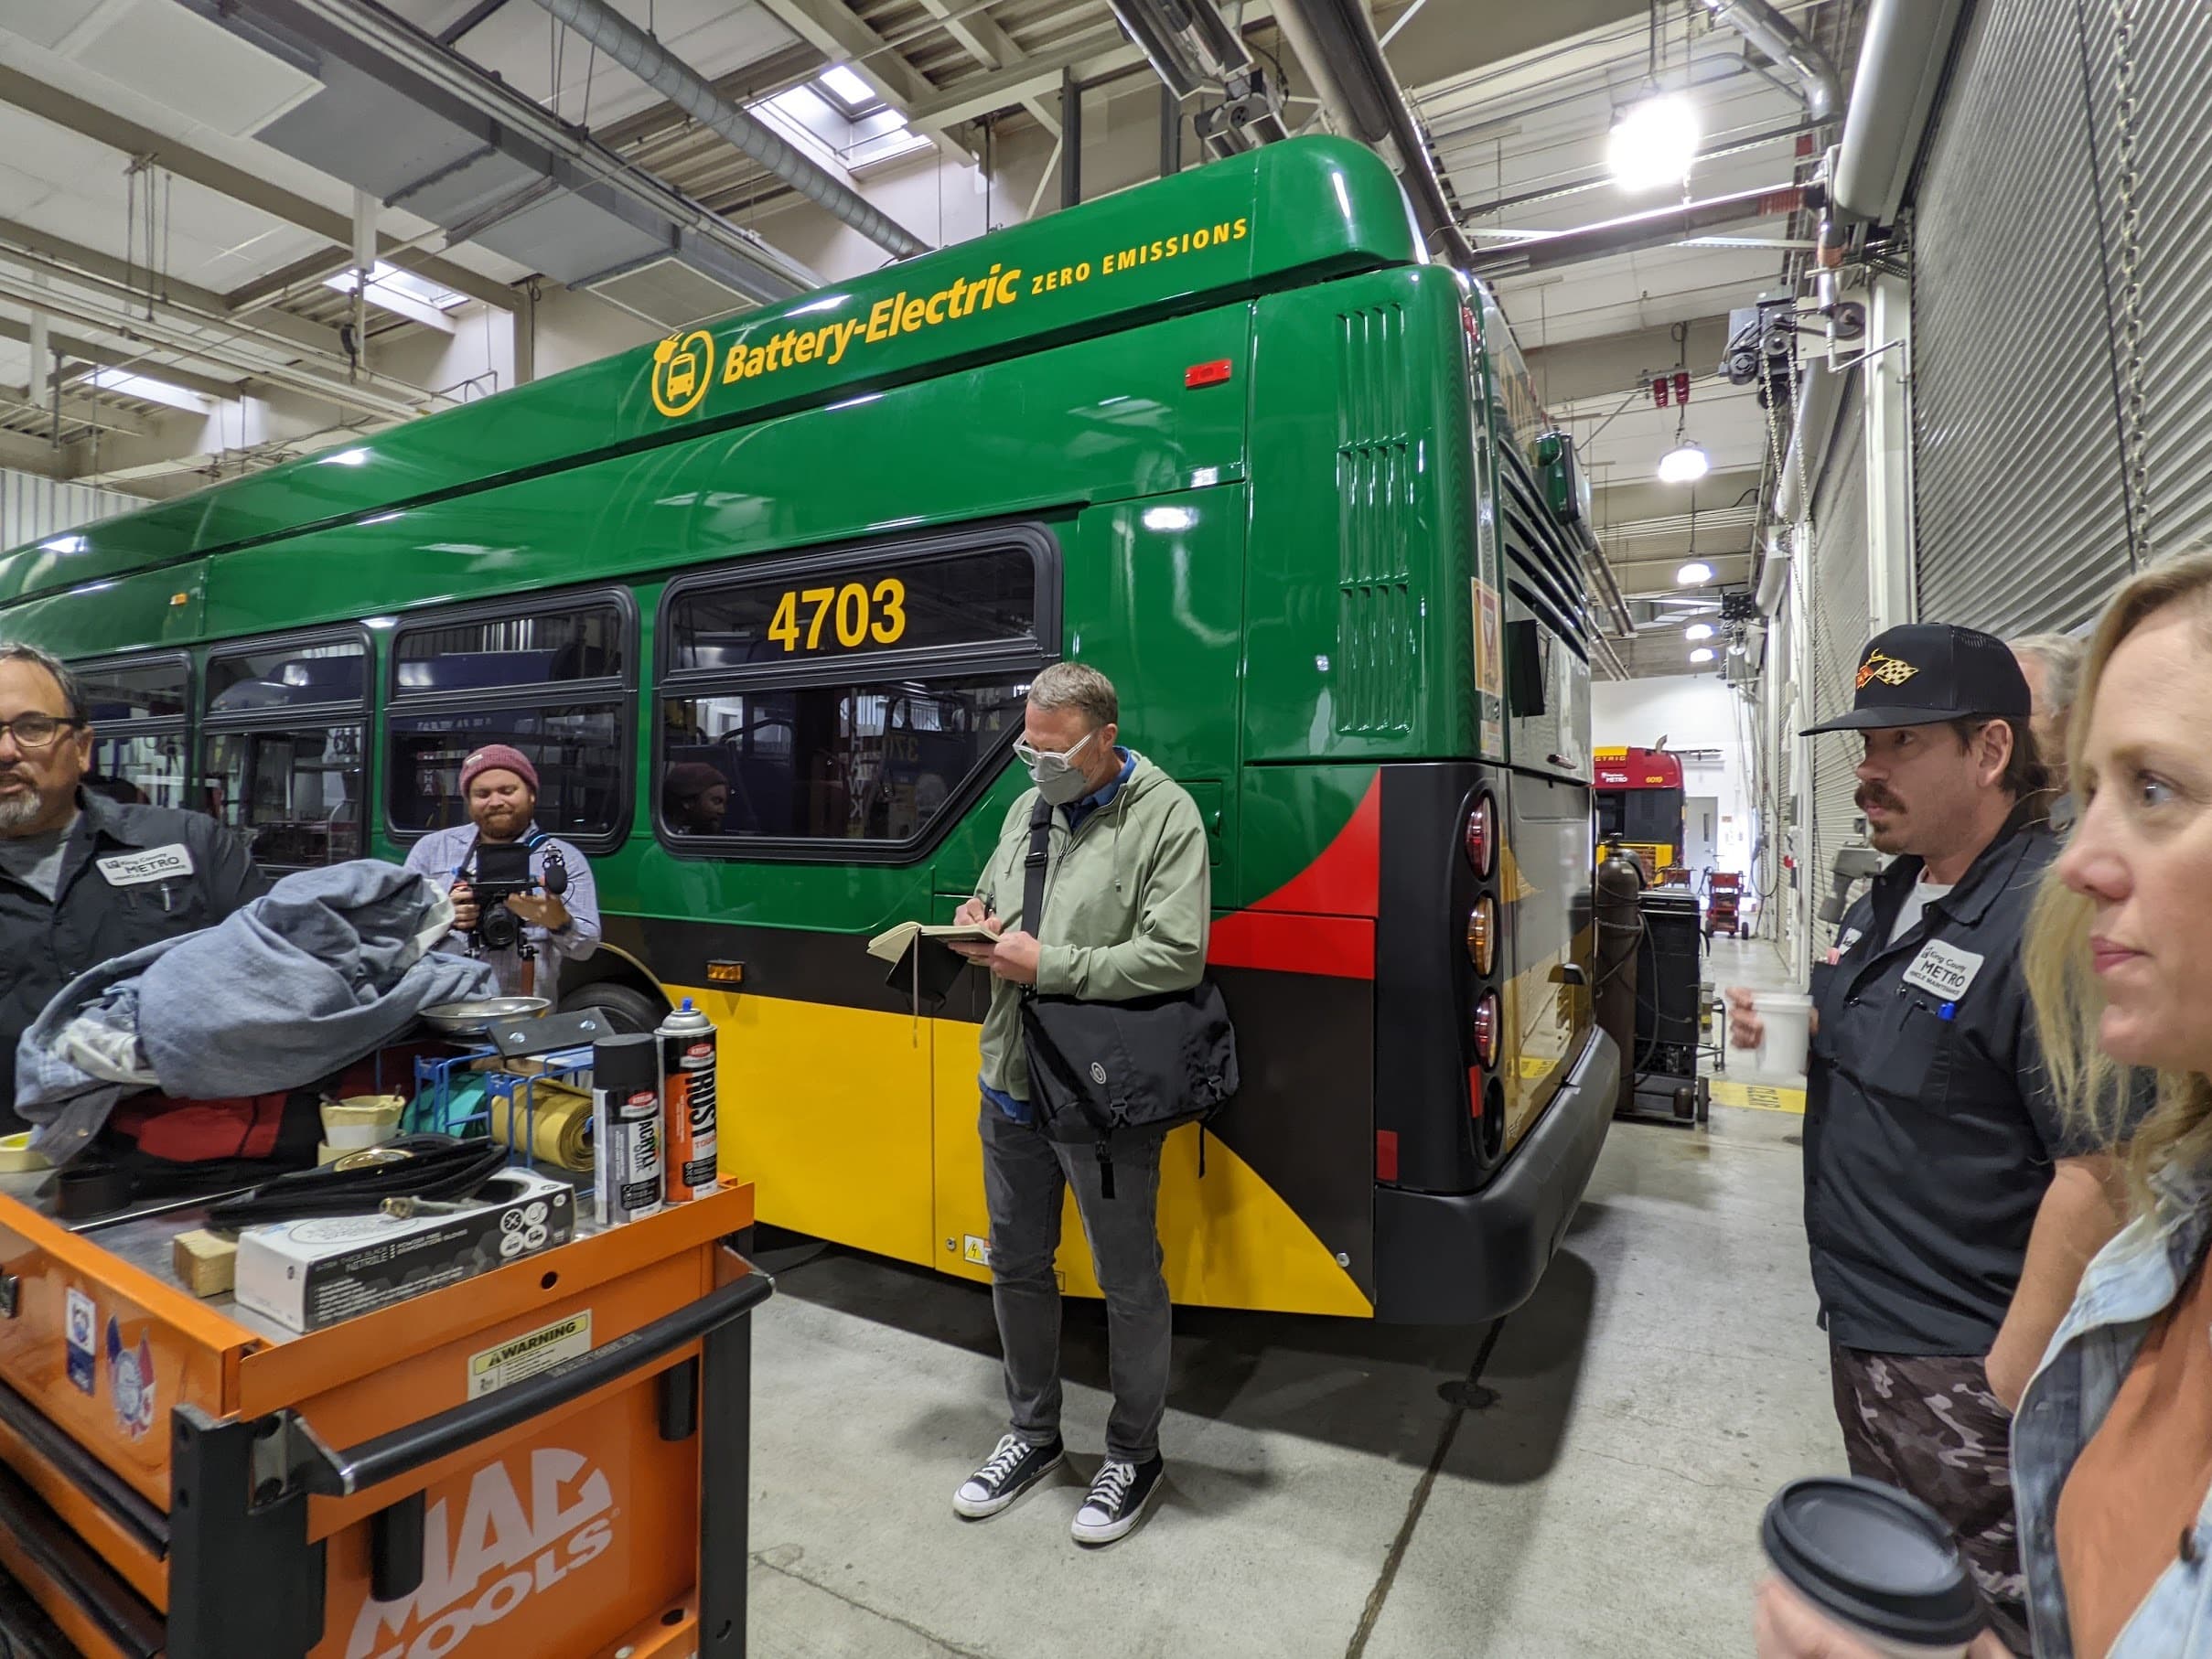 The Teague research team interviews King County Metro bus operators to get information that will inform the livery design.